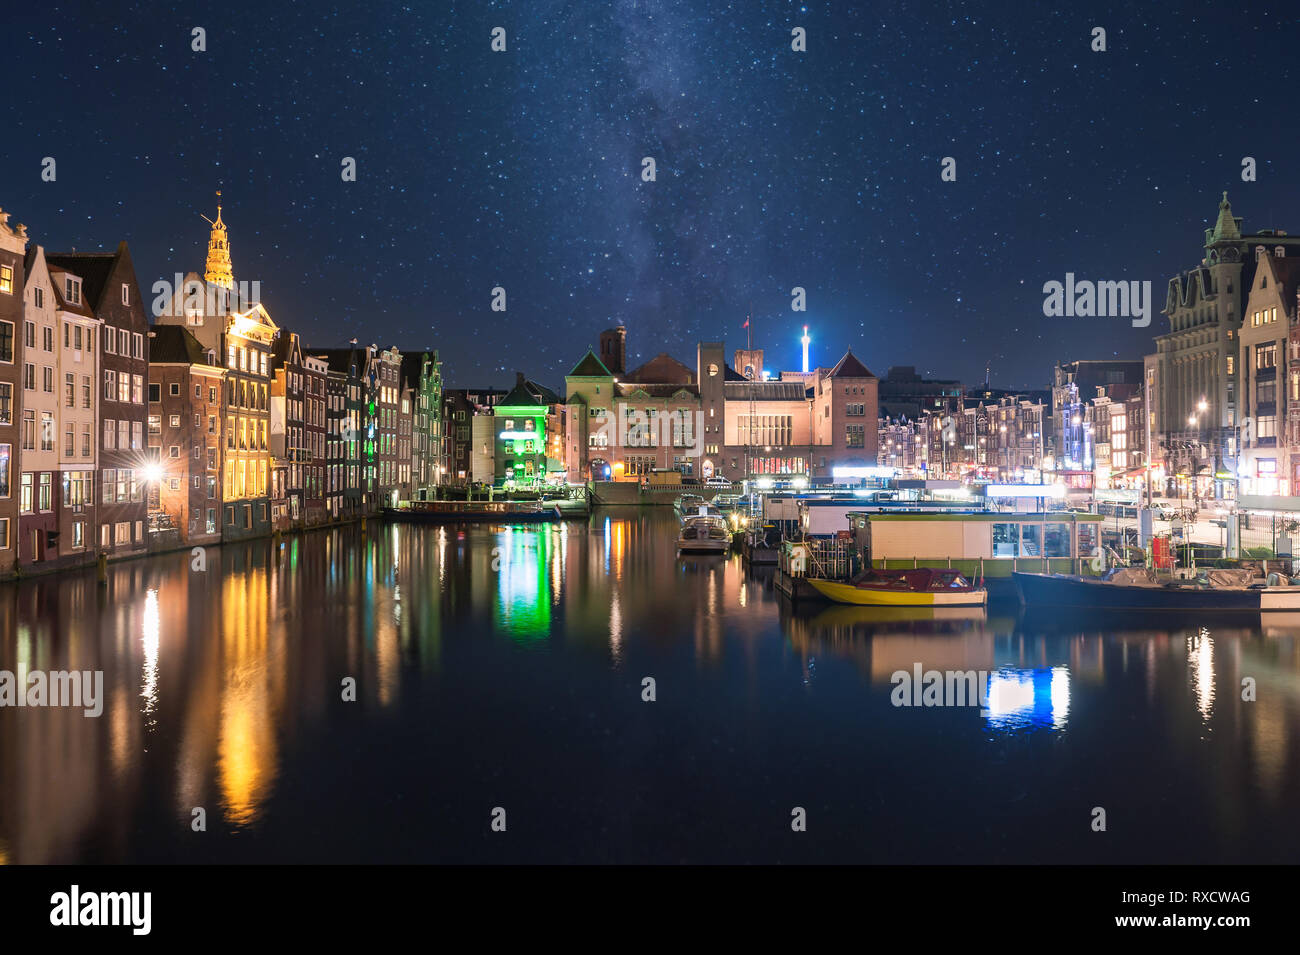 Night landscape with houses and canal in Amsterdam, light reflection in water, cityscape Stock Photo